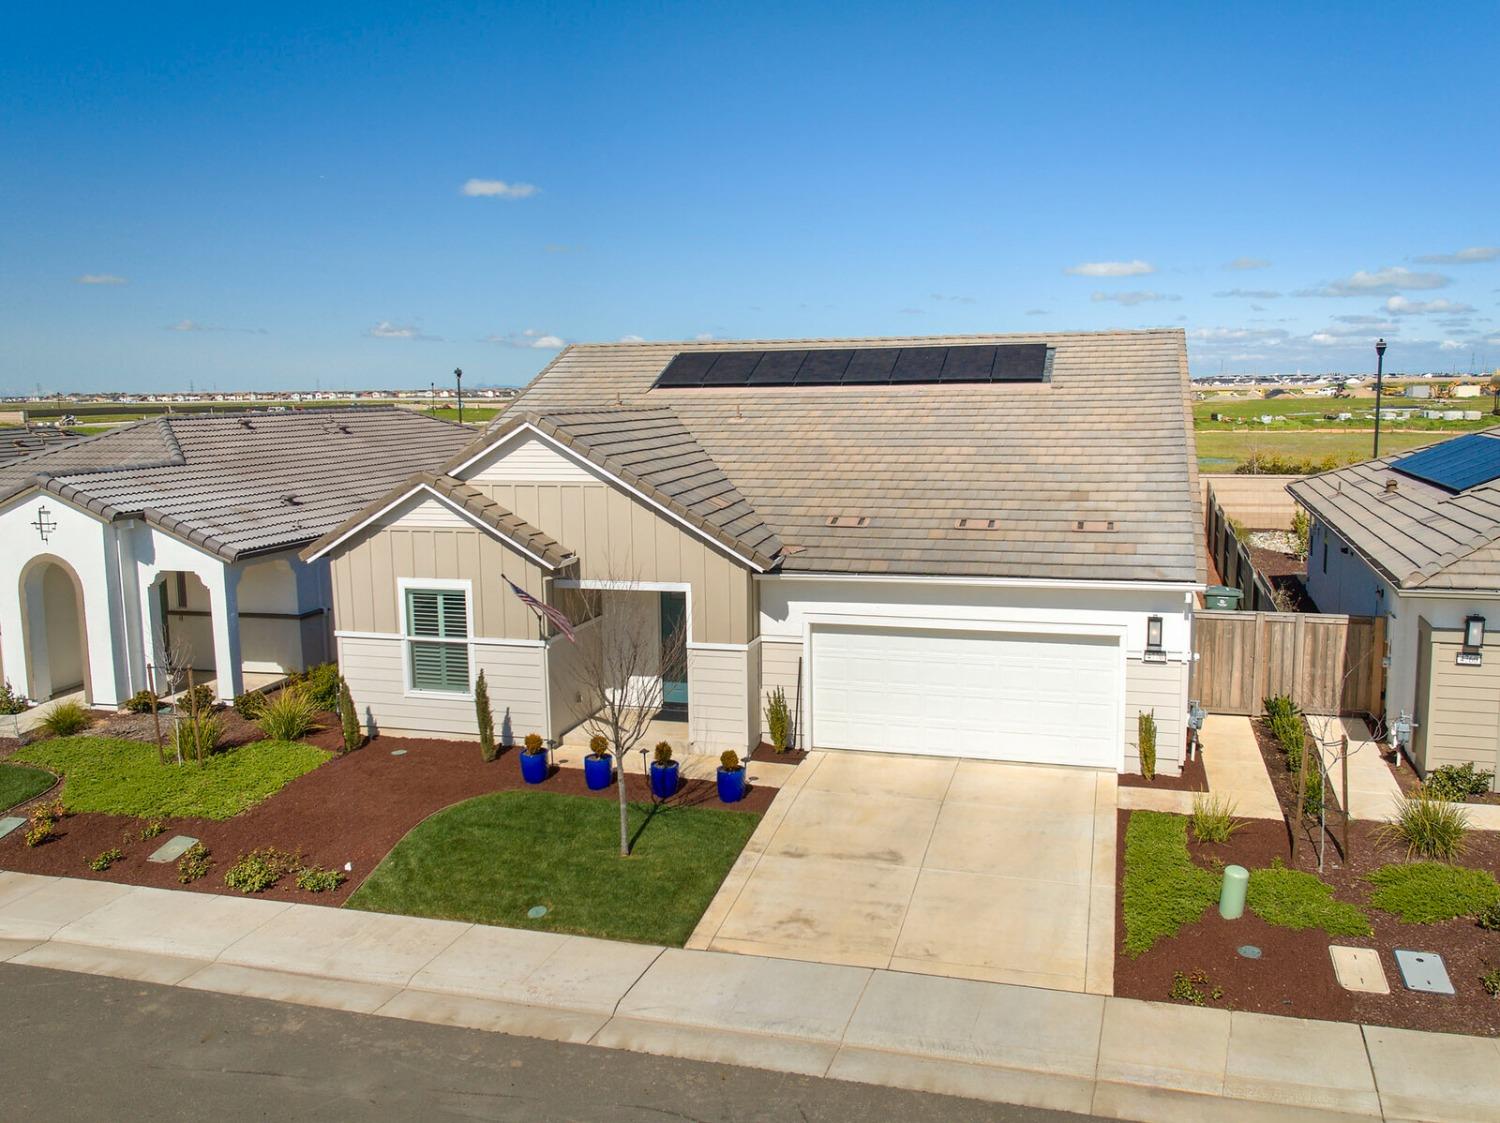 Photo of 4770 Peace Lily Ln in Roseville, CA